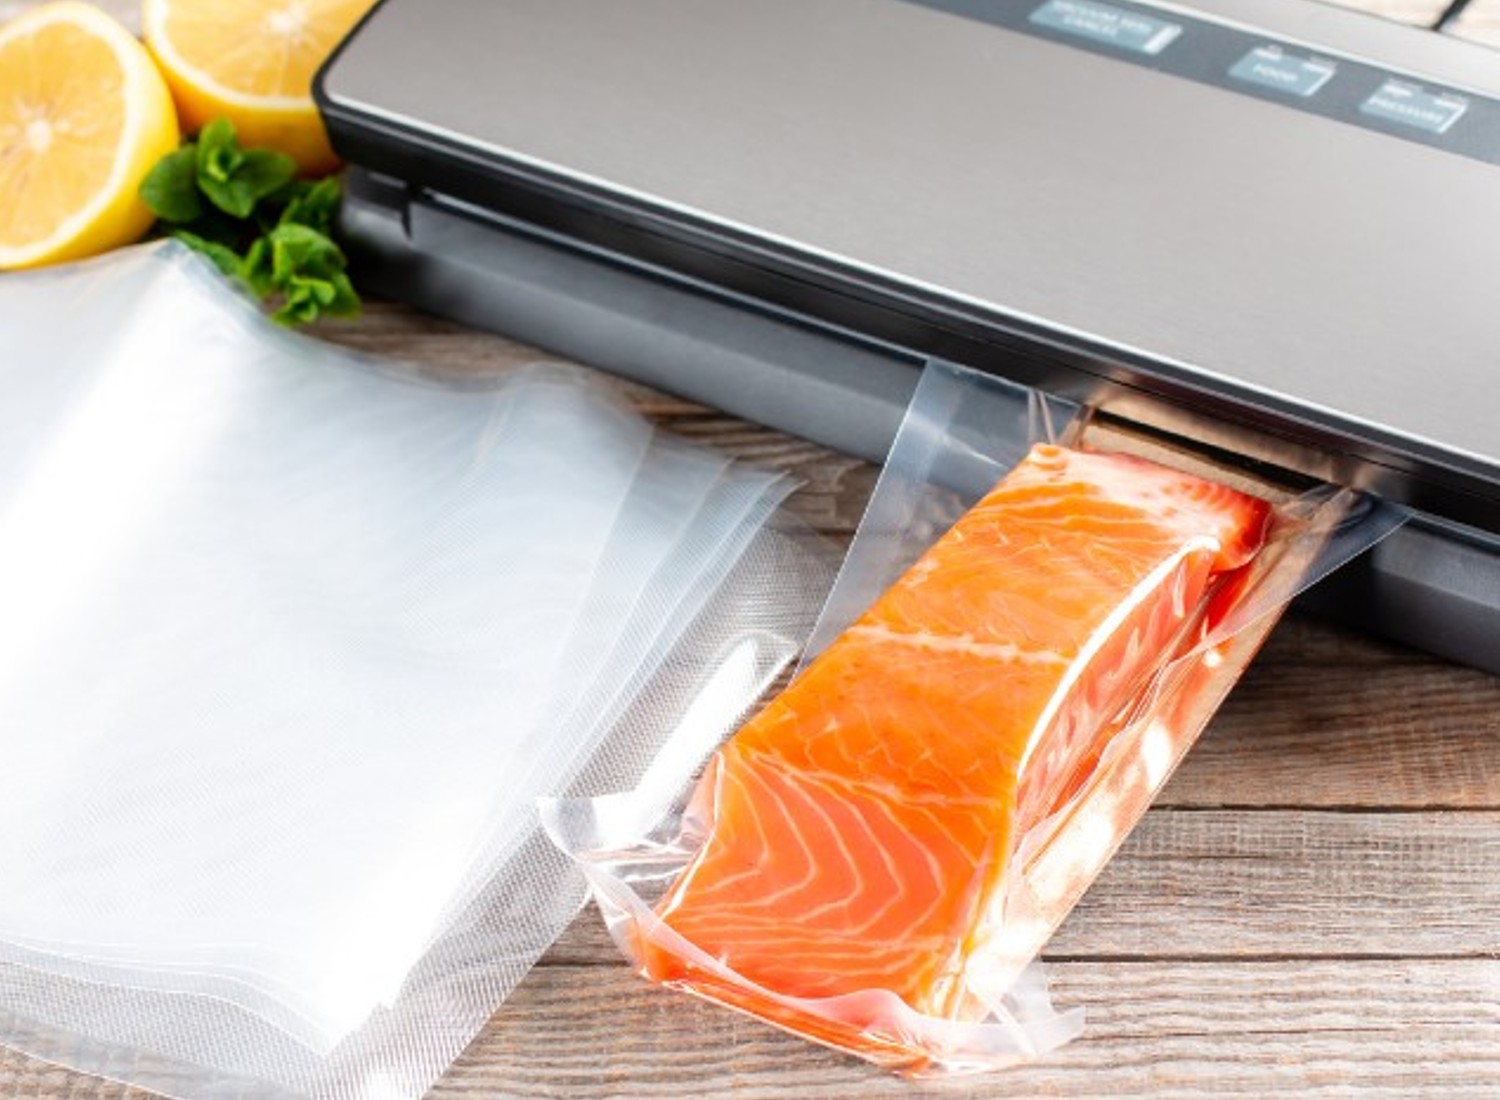 MegaWise Vacuum Sealer Machine Review & How To Use 